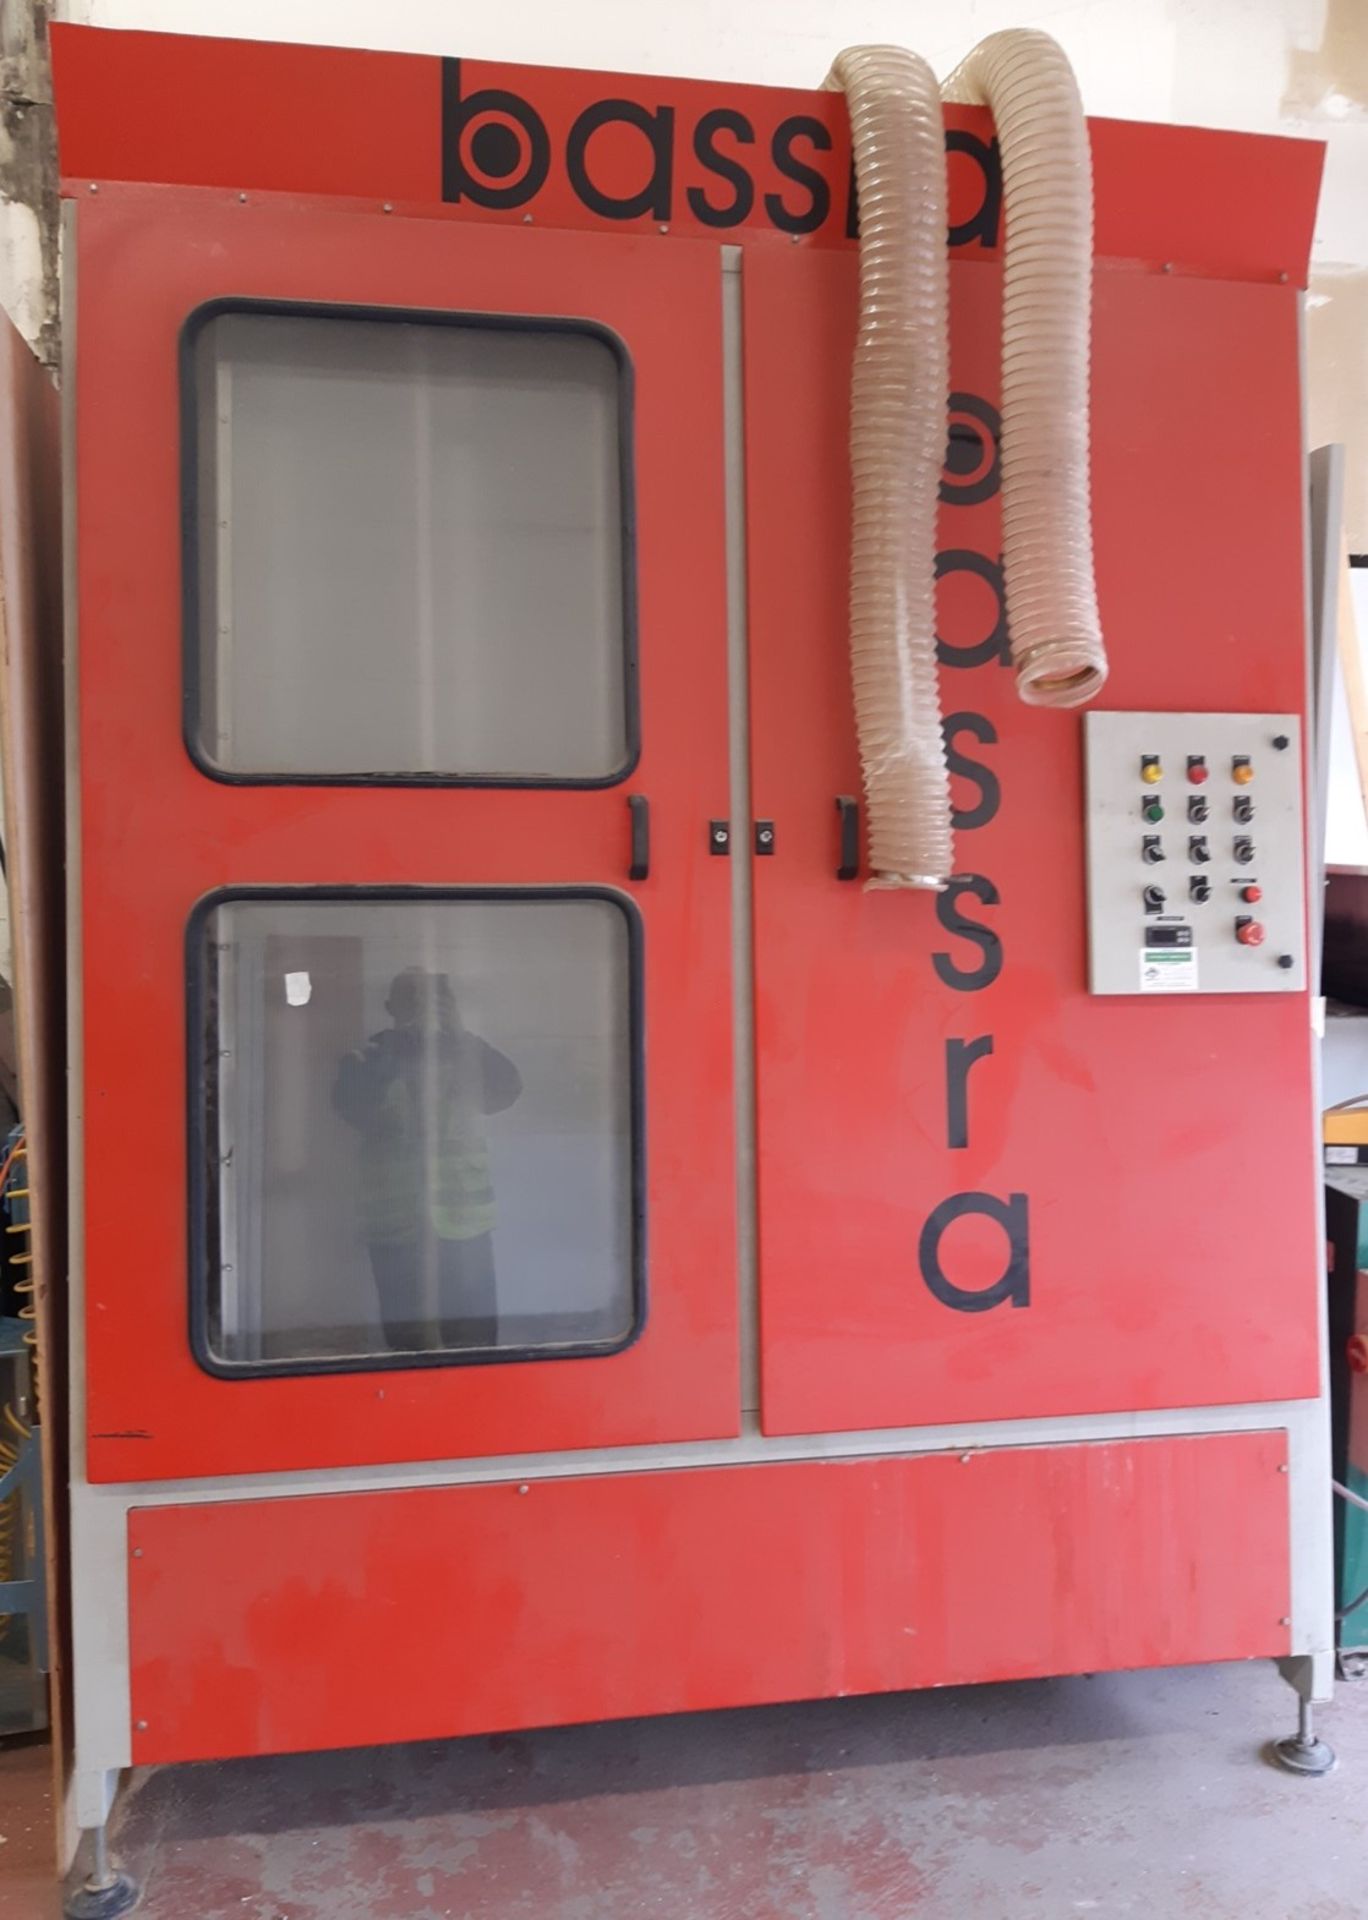 BASSRA BMT 1.7m 4 brush Glass Washer - Serial Number- BMT-1.7m-4BGW-BMT/11469